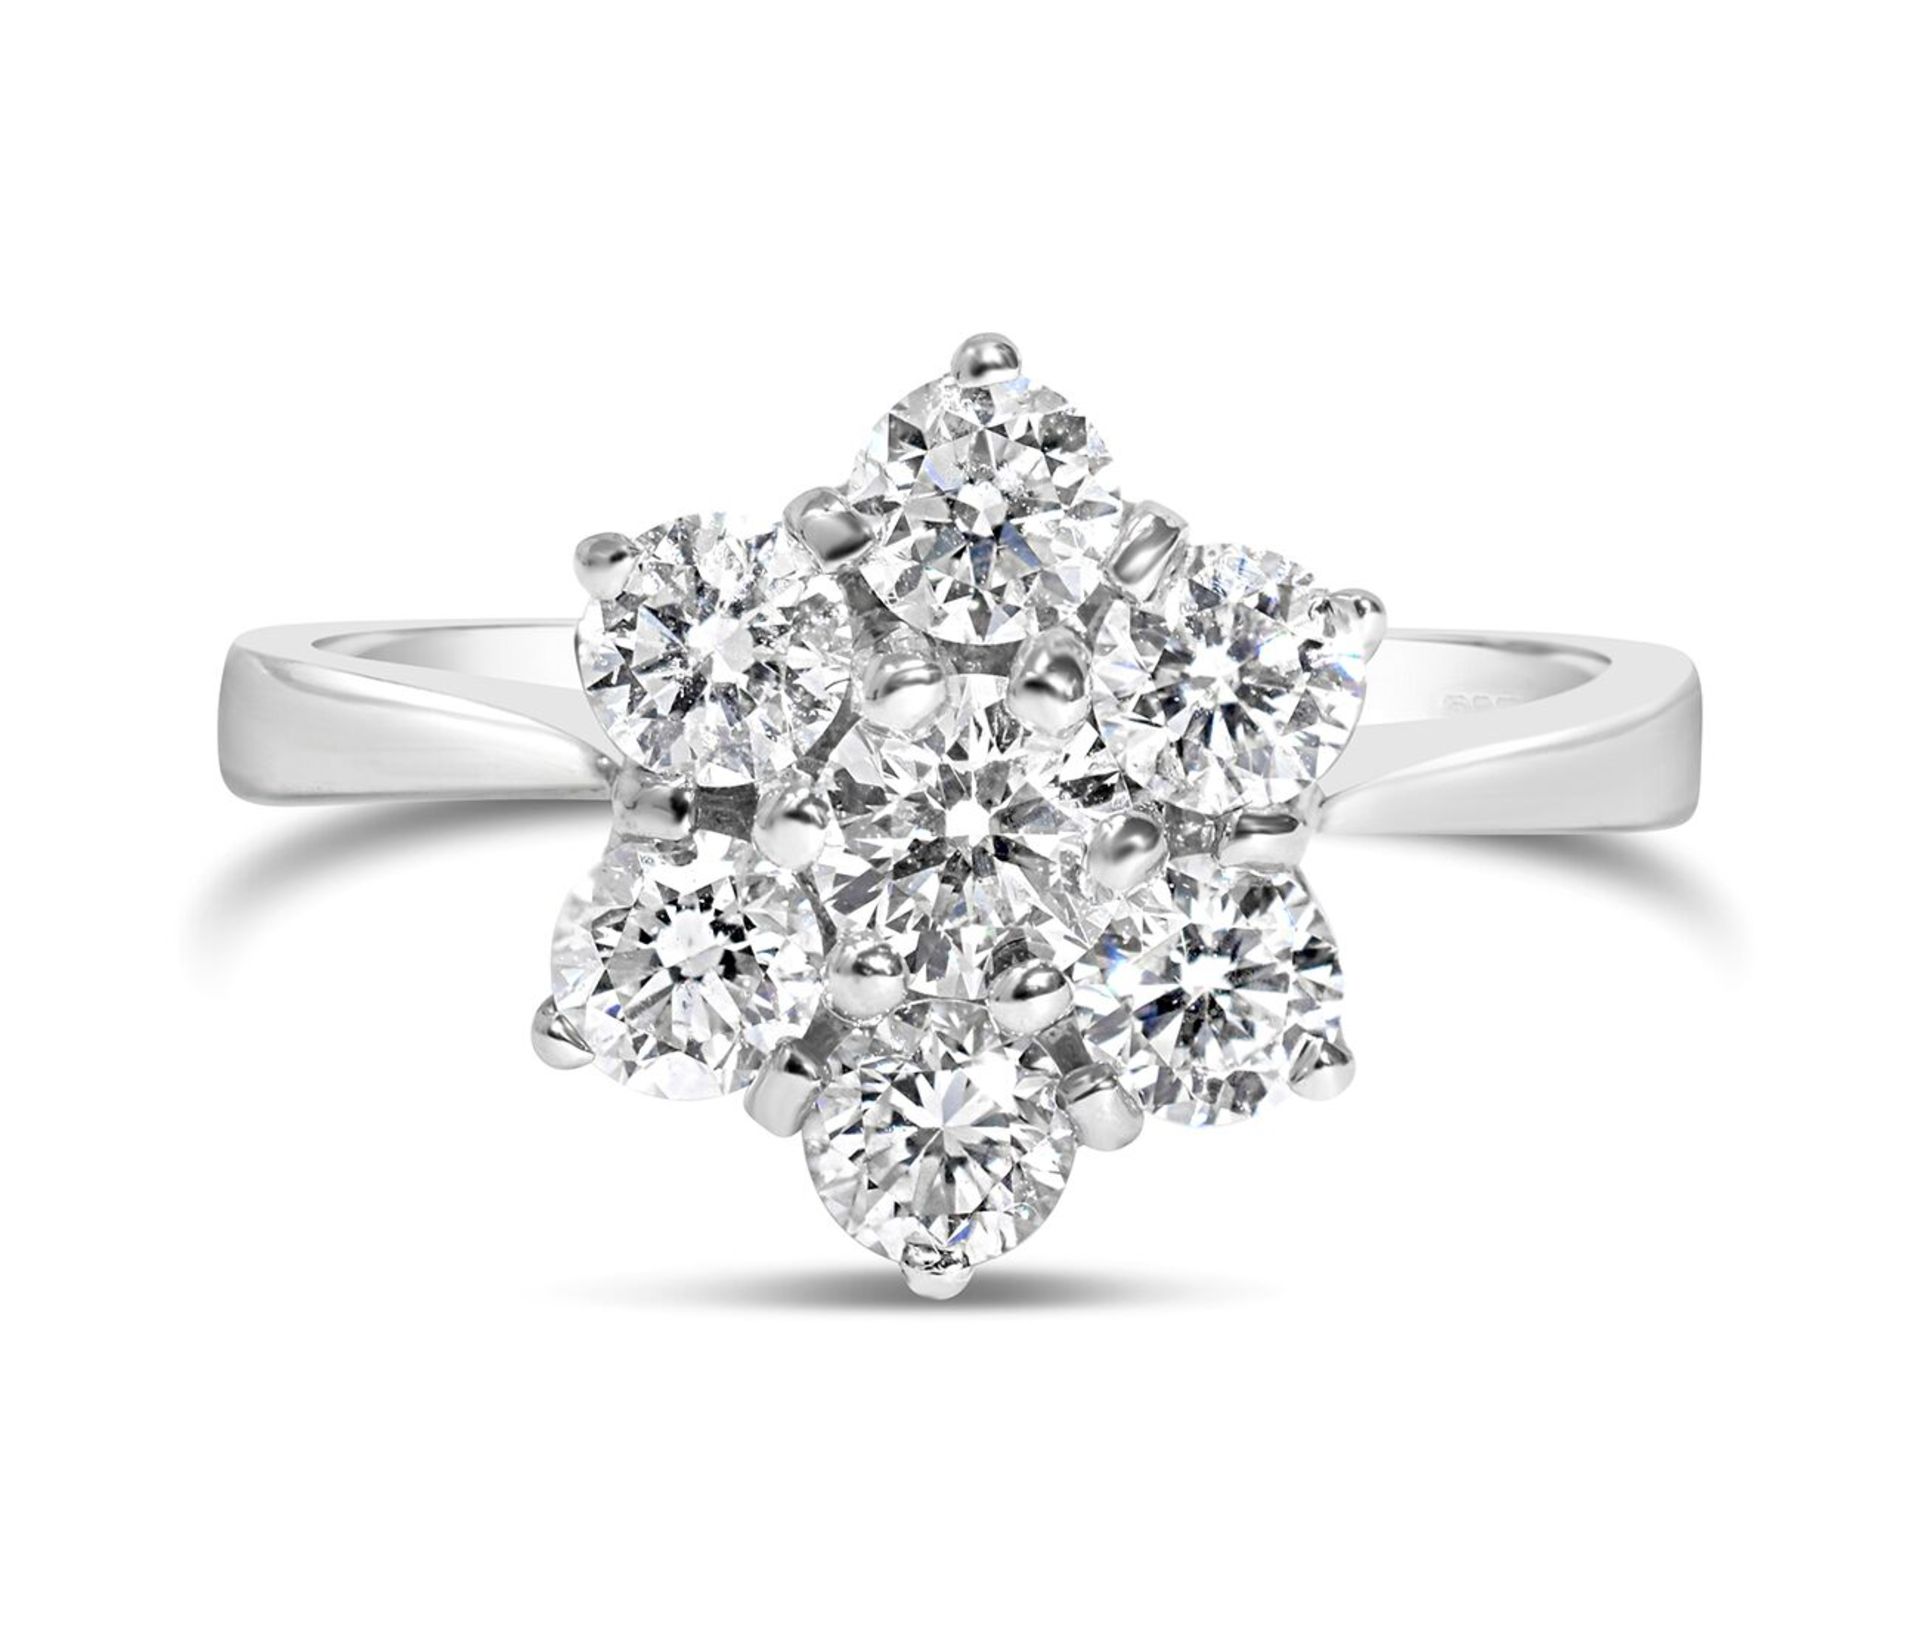 Flower Diamond Ring. With AGS Certificate, Metal 18ct white gold, Weight 3.82, Diamond Weight (ct)